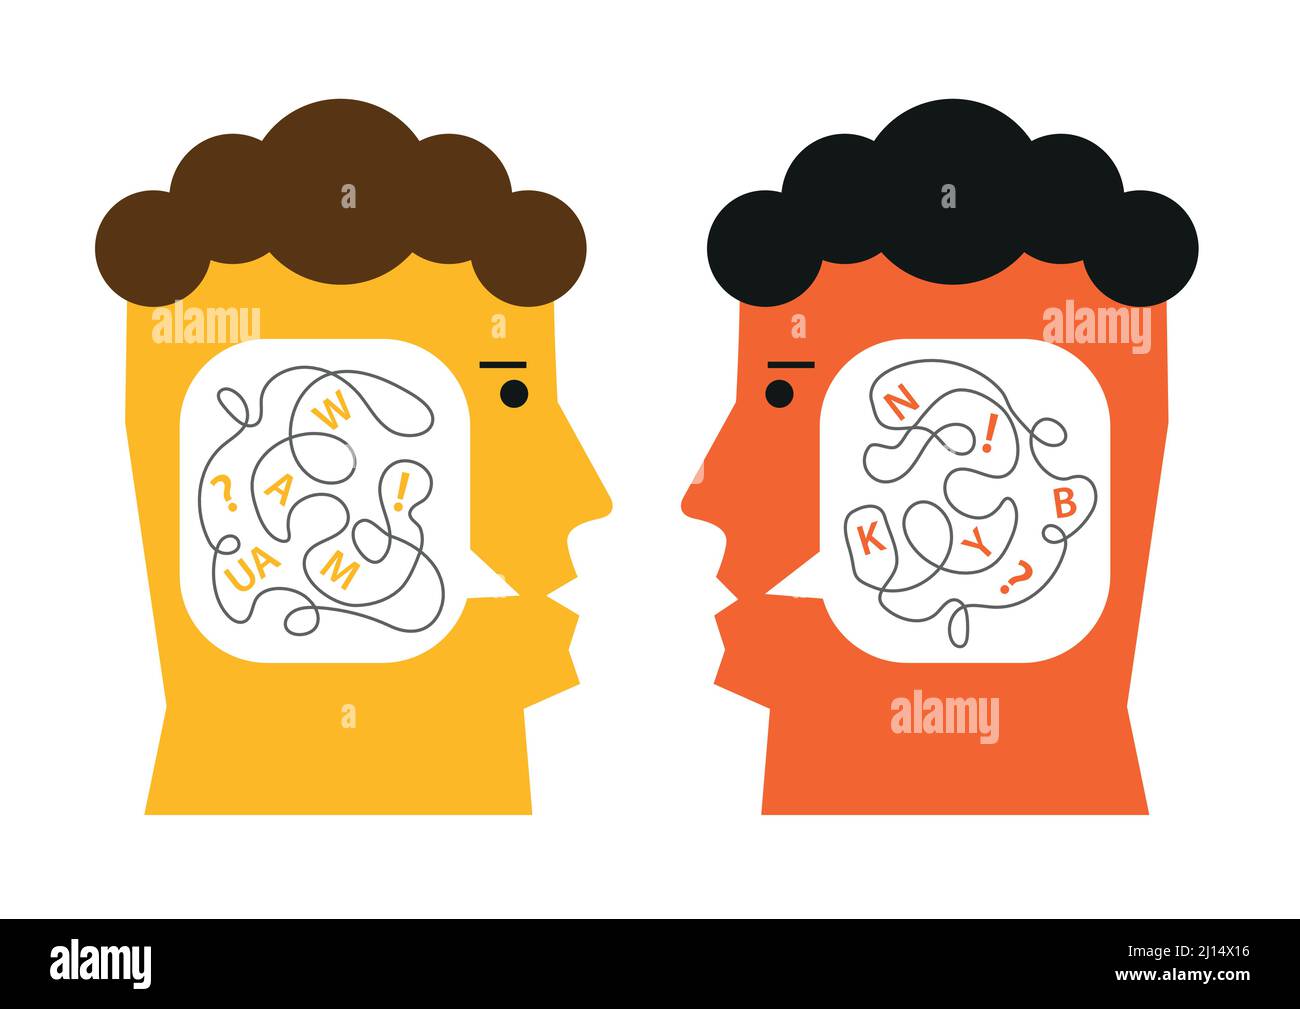 Impossibility of dialogue, unable to empathize with others, psychology concept. Illustration of Stylized Male Heads with speech bubble inside. Stock Vector